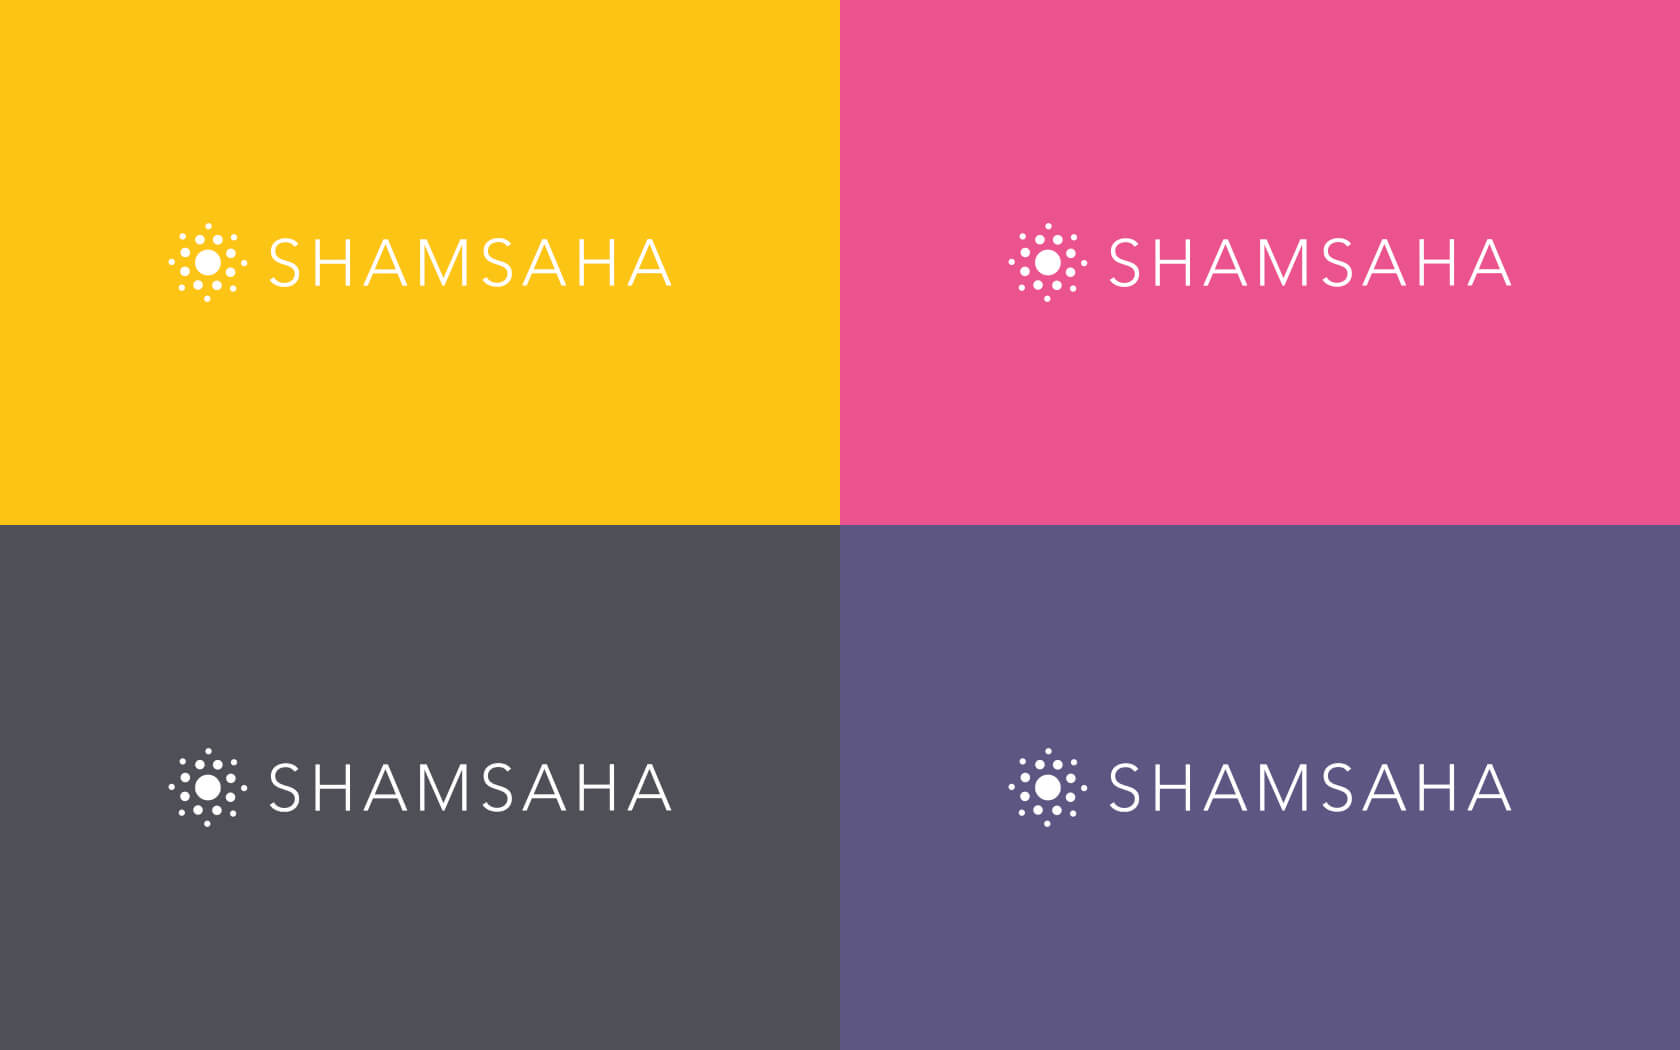 Brand logo with different background colours